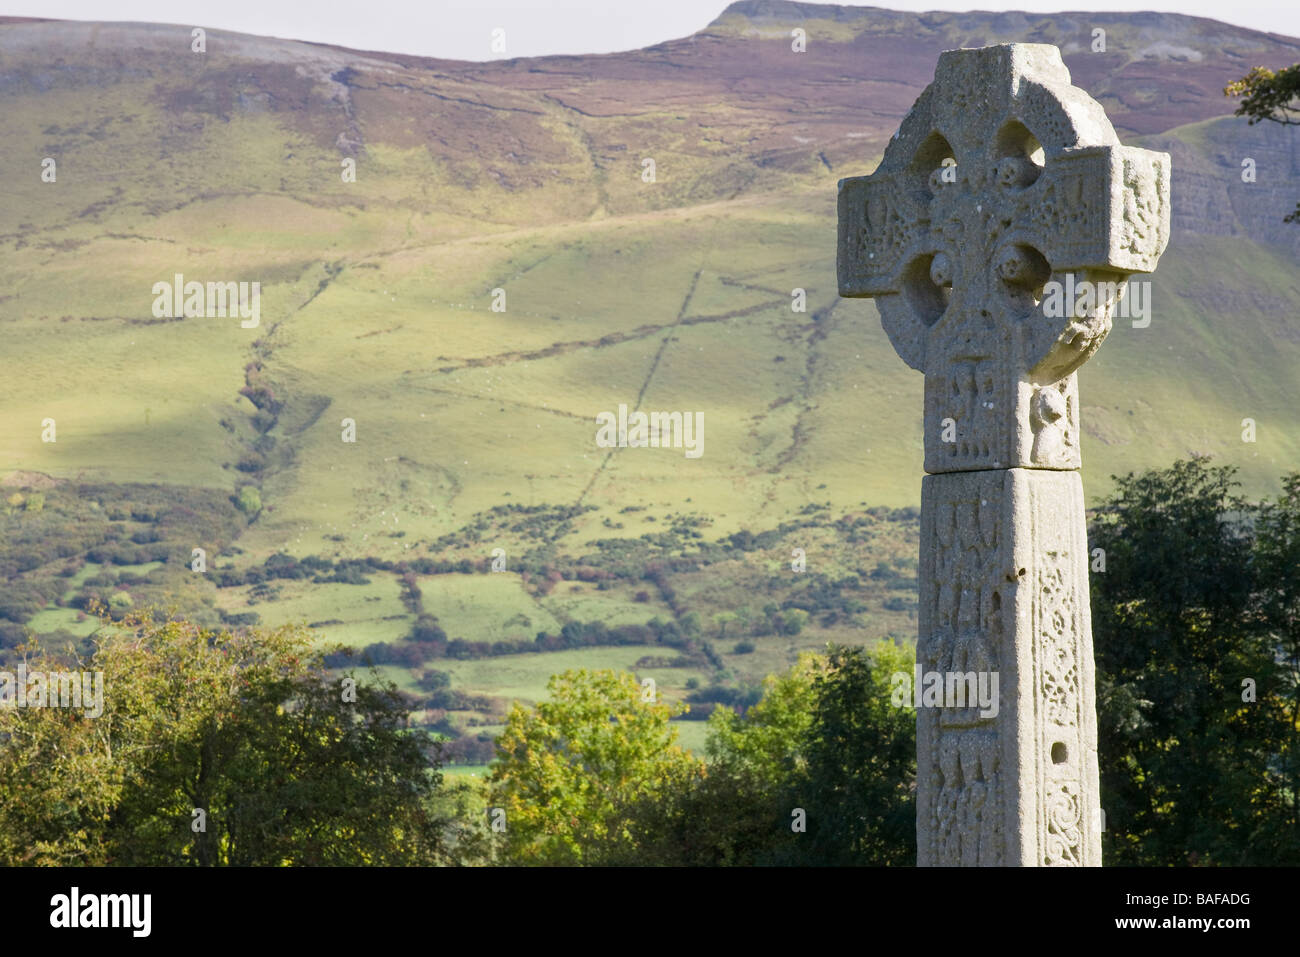 Drumcliff High Cross. The famous high cross with the pastures of Ben Bulbin or Benbulbin in the background. Stock Photo